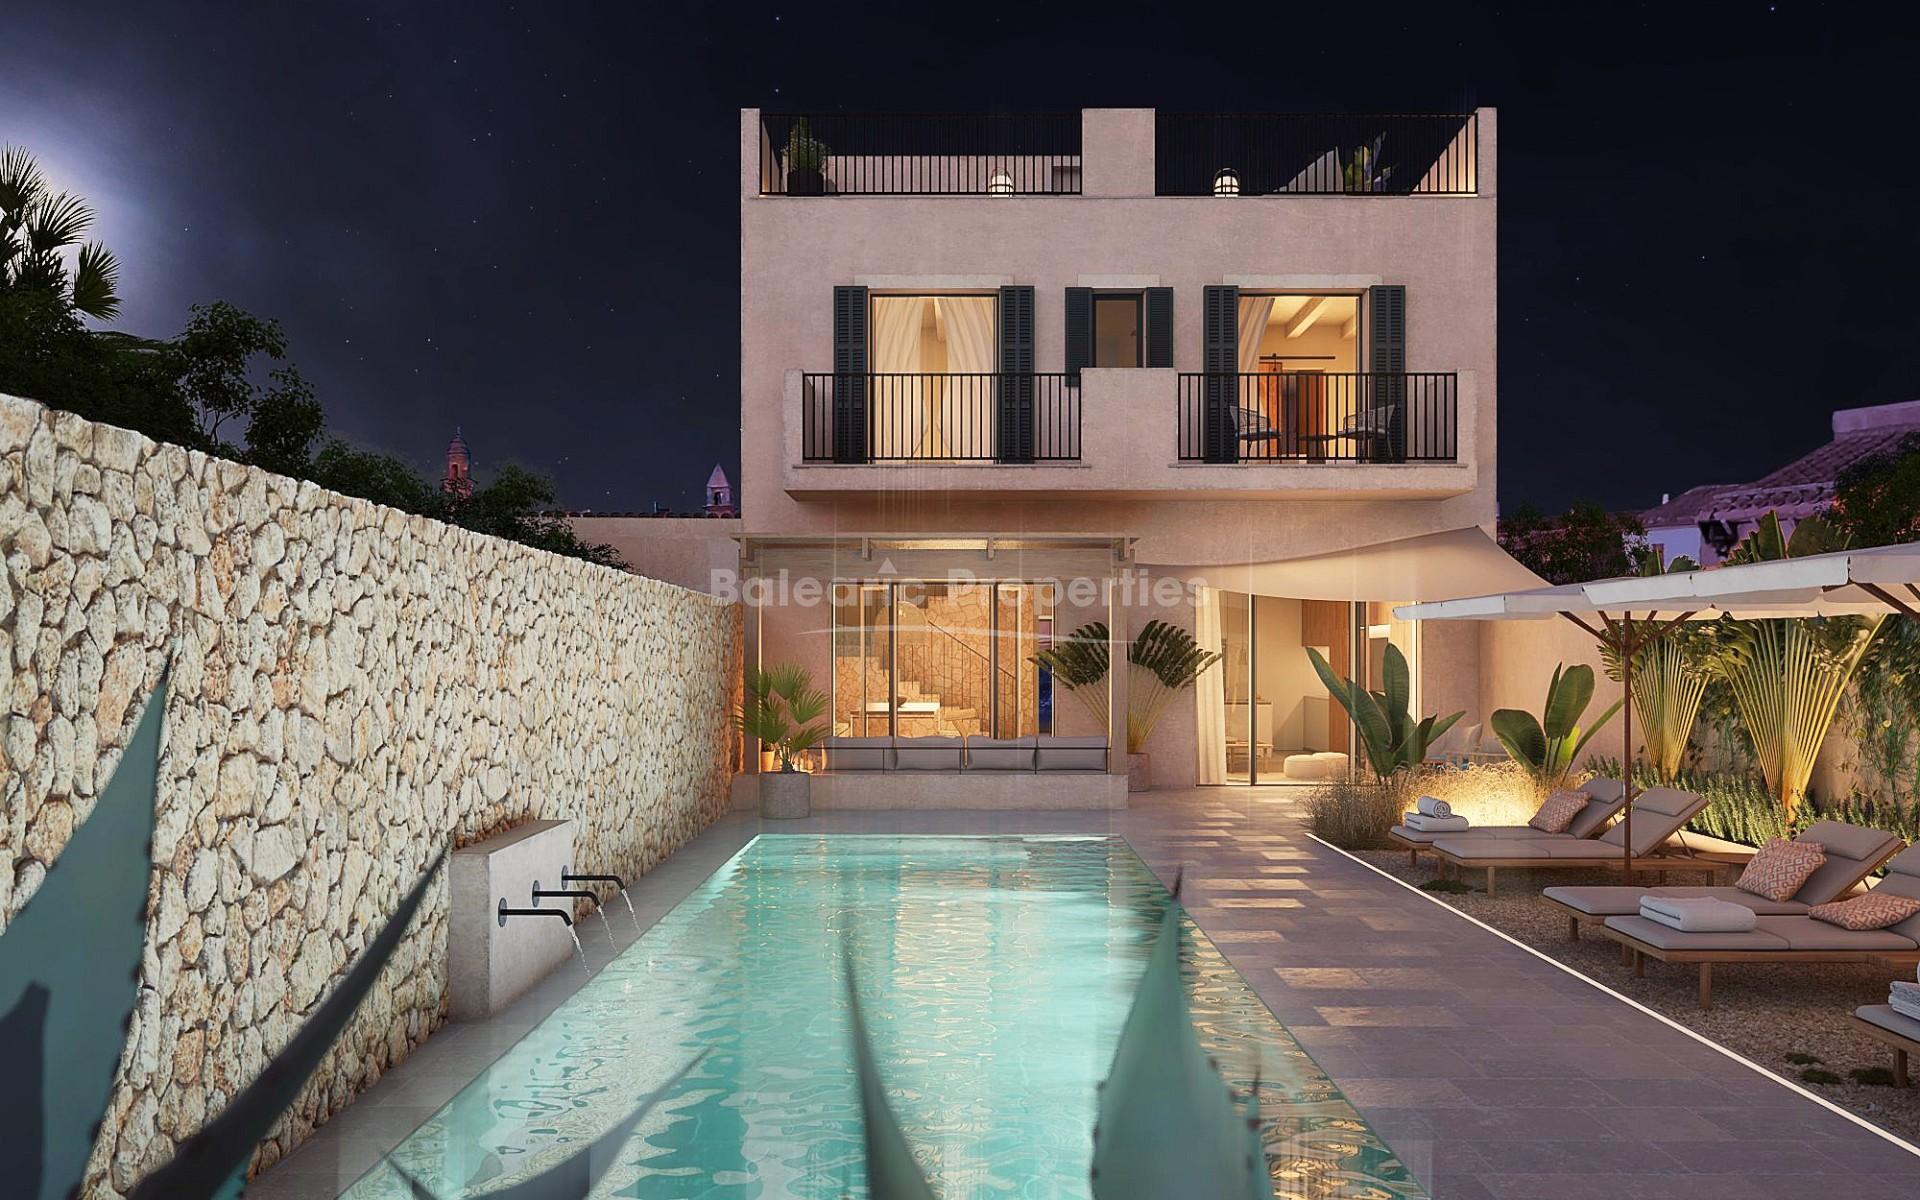 New build luxury townhouse including a 2 bedroom guest house for sale in Ses Salines, Mallorca